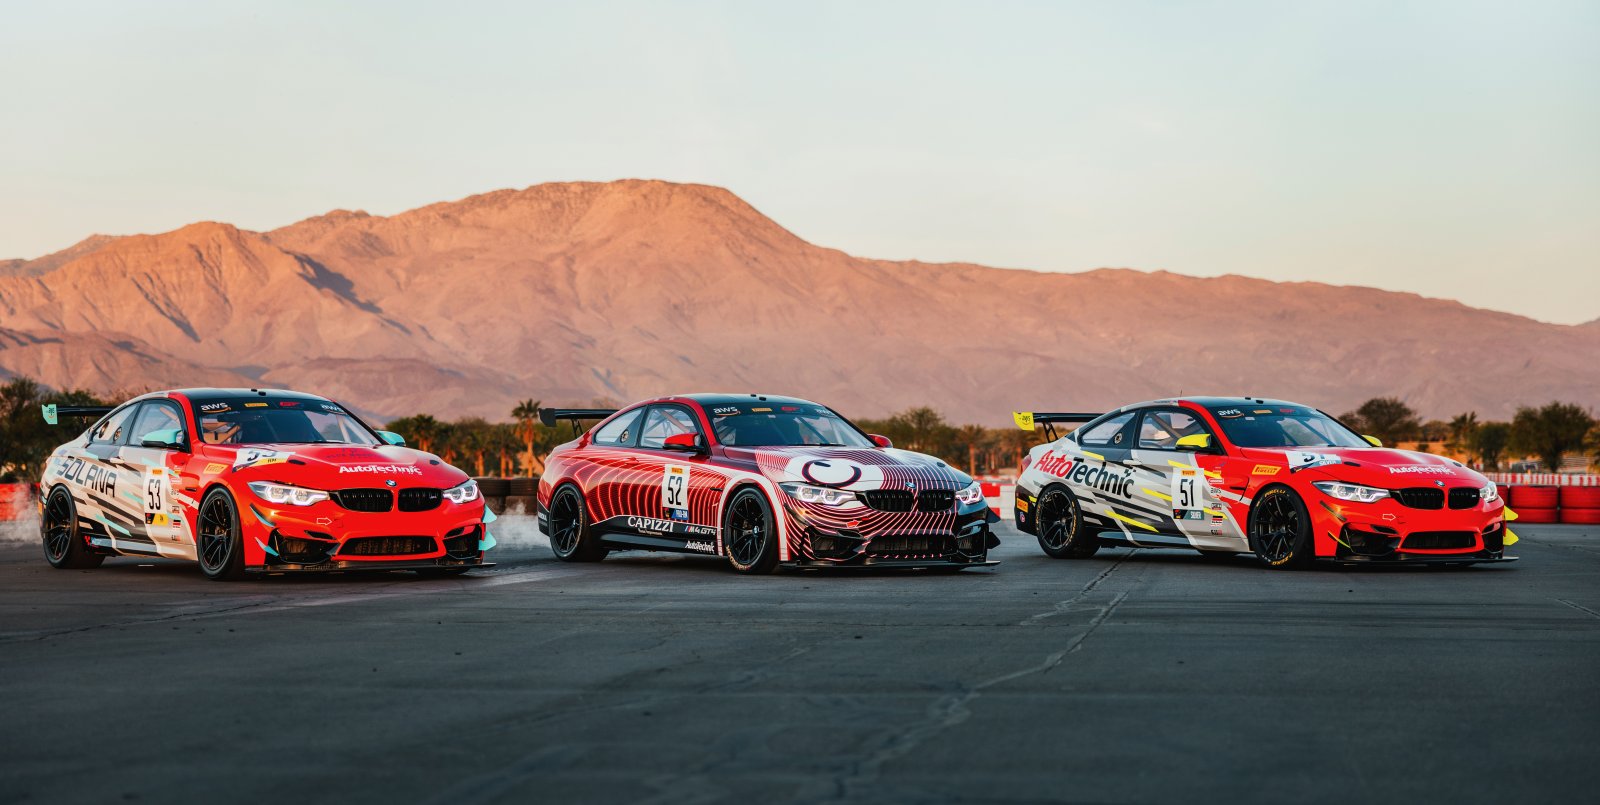 Auto Technic Racing Poised for a Successful Start to the 2022 Pirelli GT4 America Season